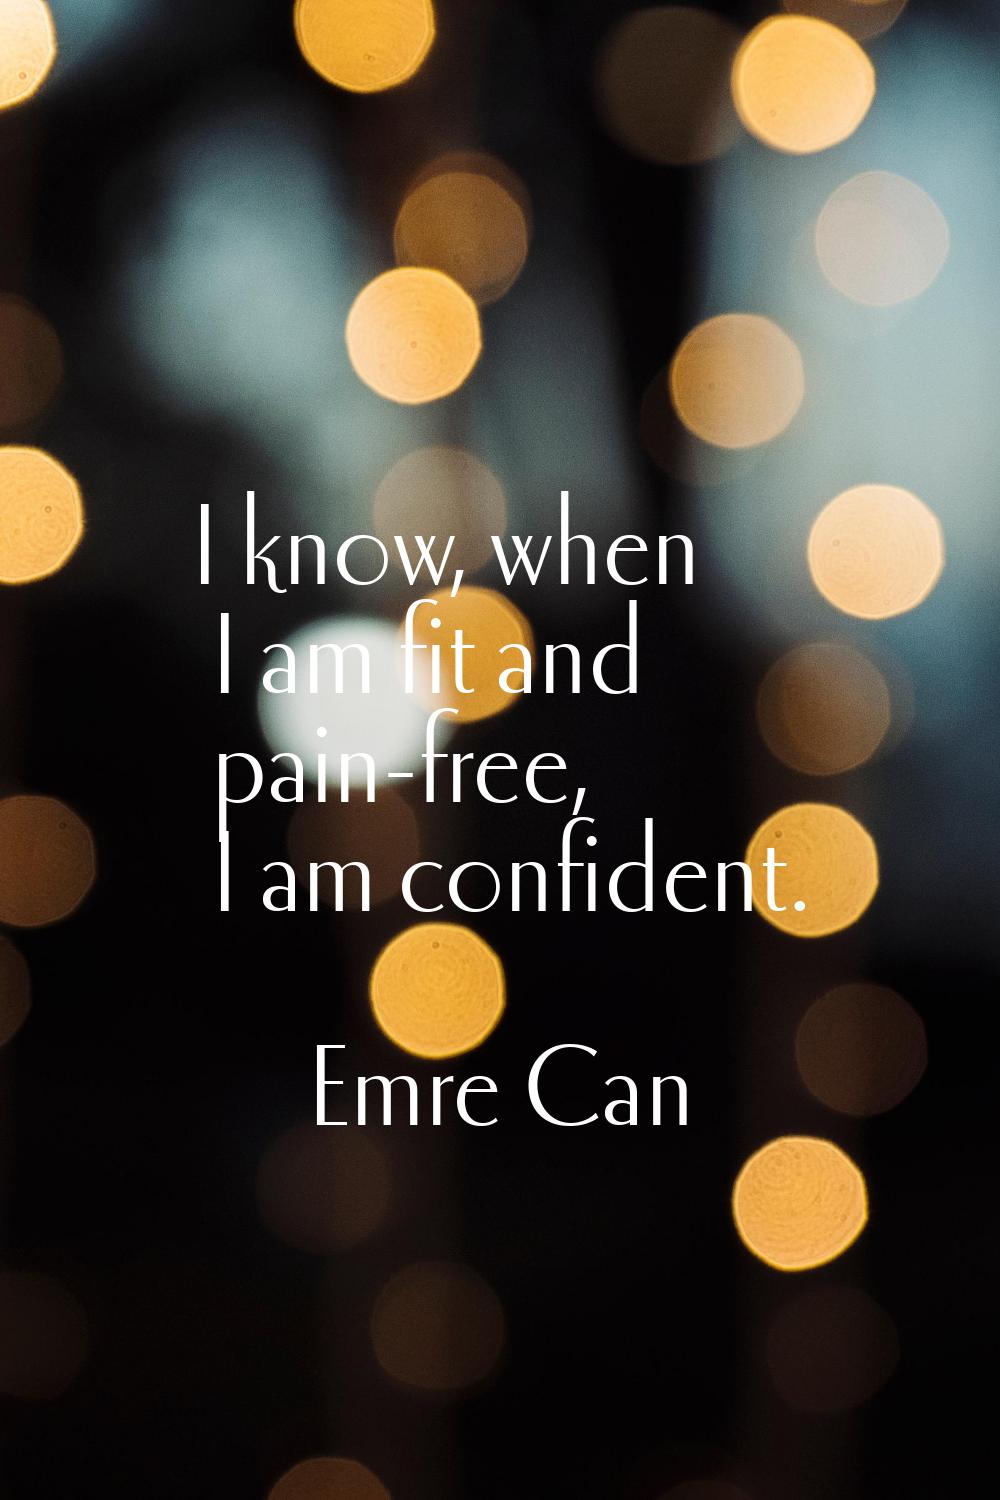 I know, when I am fit and pain-free, I am confident.